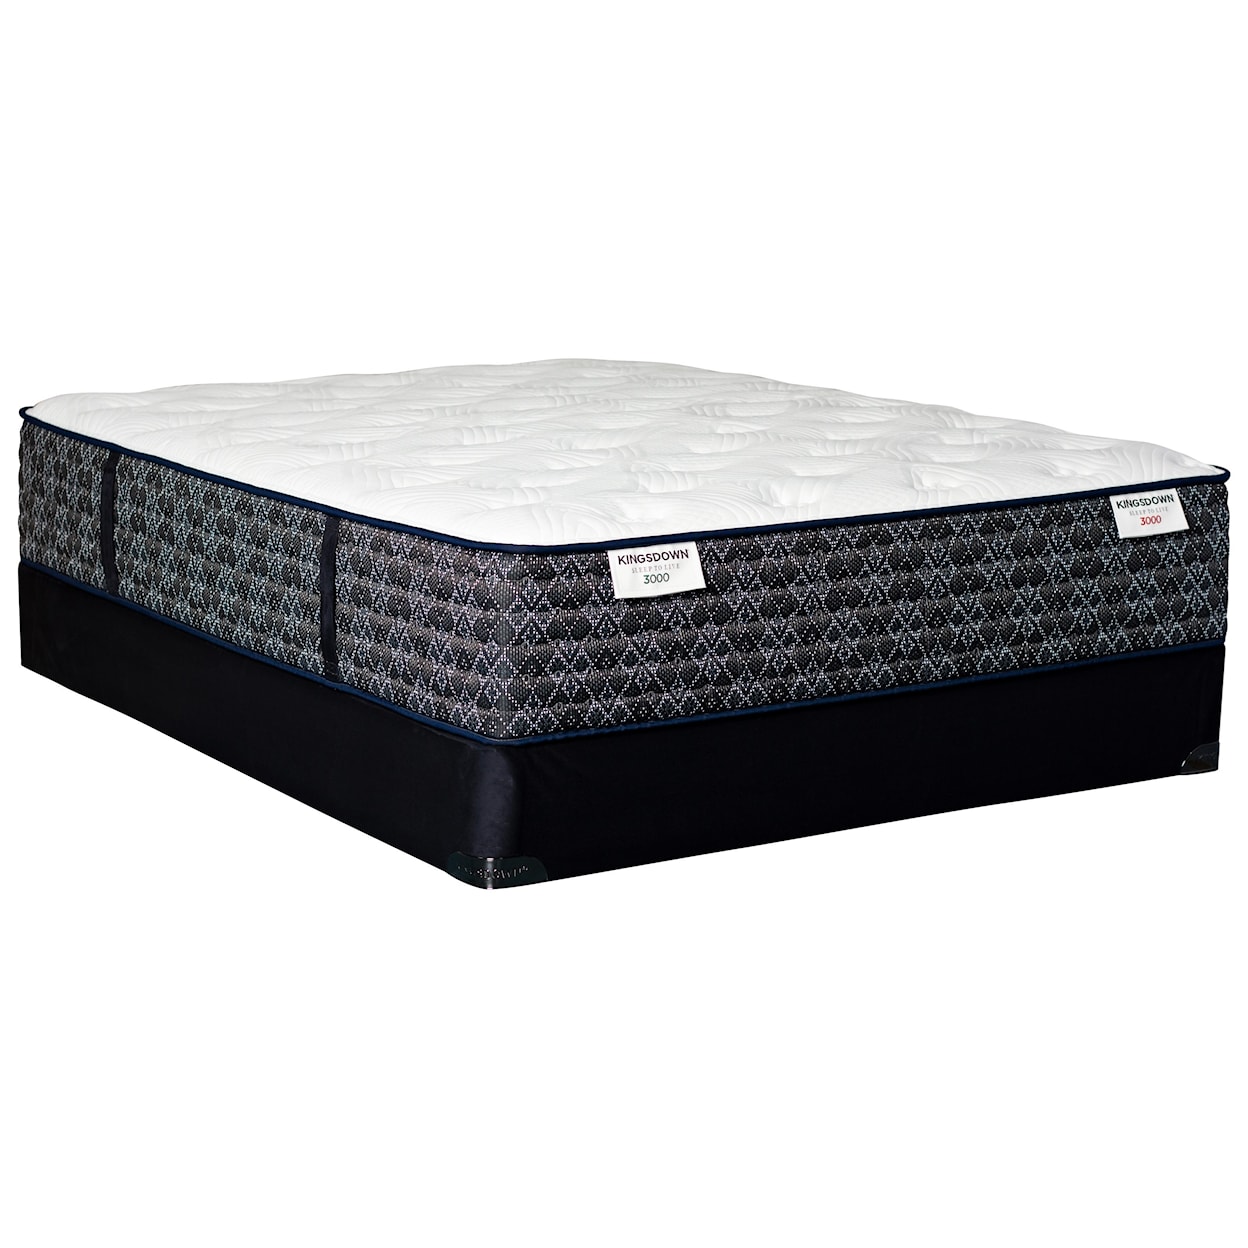 Kingsdown Sleep to Live 3000 Green Red Full Pocketed Coil Mattress LoPro Set